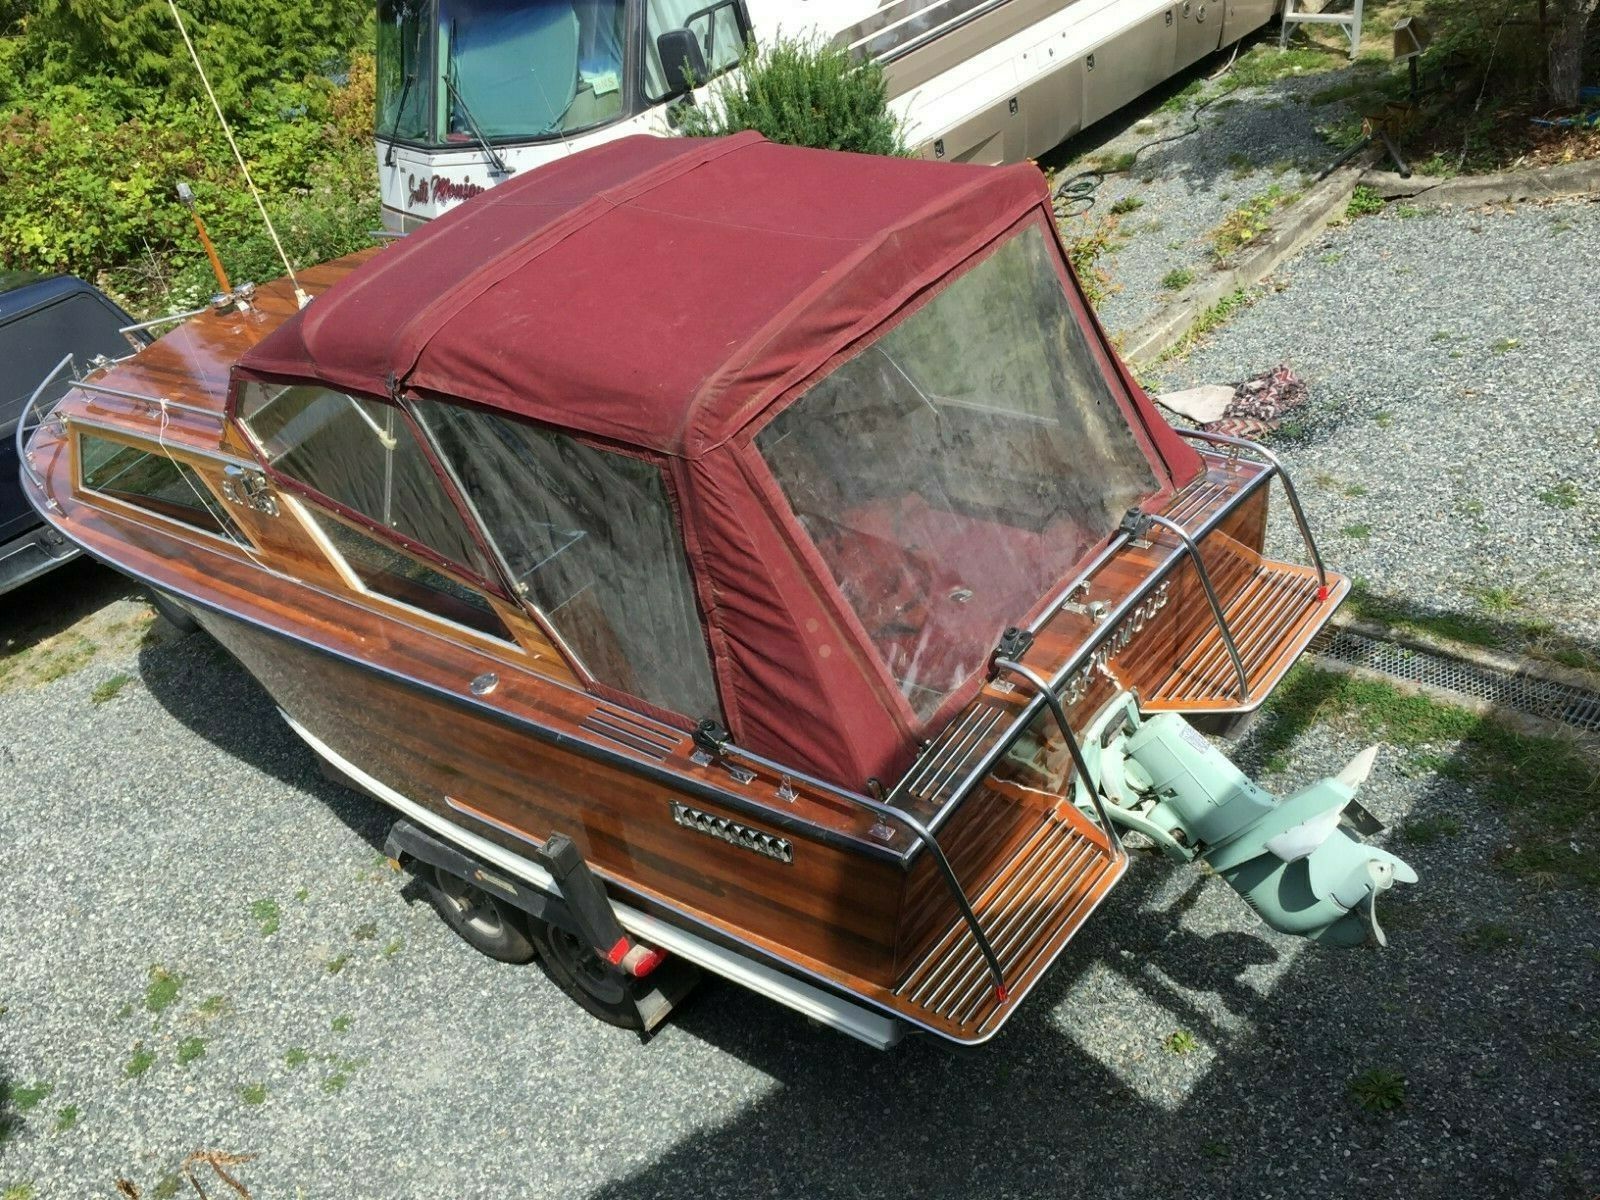 classic cedar strip plank boat 1985 for sale for $ - boats